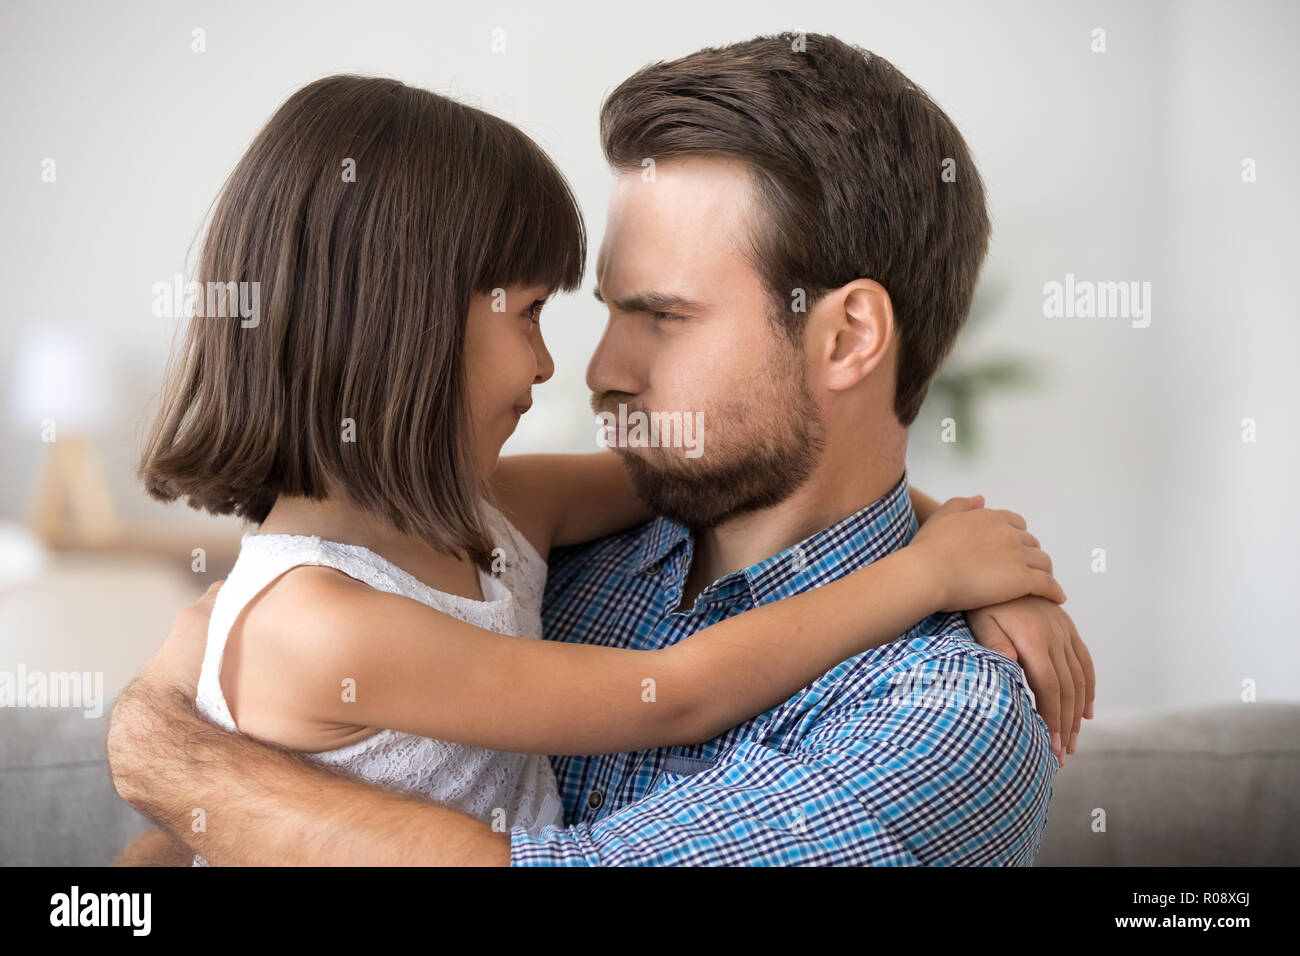 Daughter and dad make funny faces blowing cheeks Stock Photo